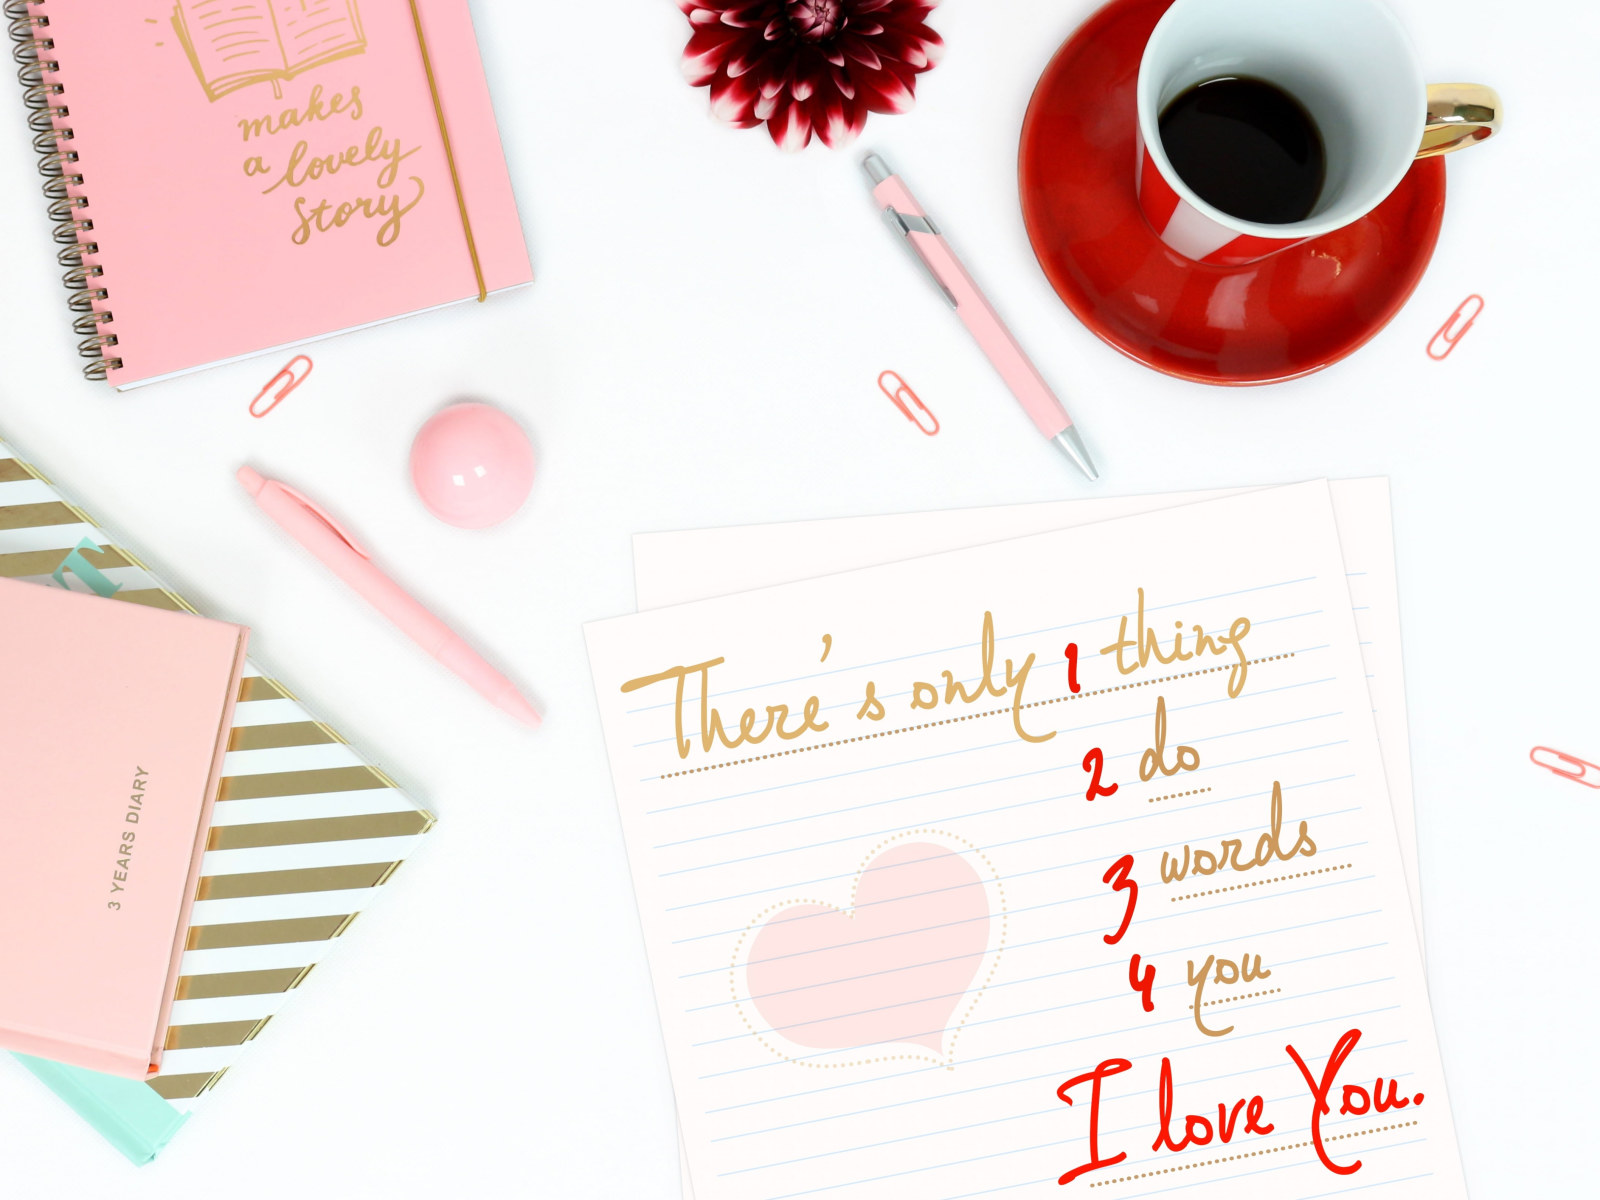 I Love You, edited, coffee, table, pink, diary, girly, cute, paper • Wallpaper For You HD Wallpaper For Desktop & Mobile